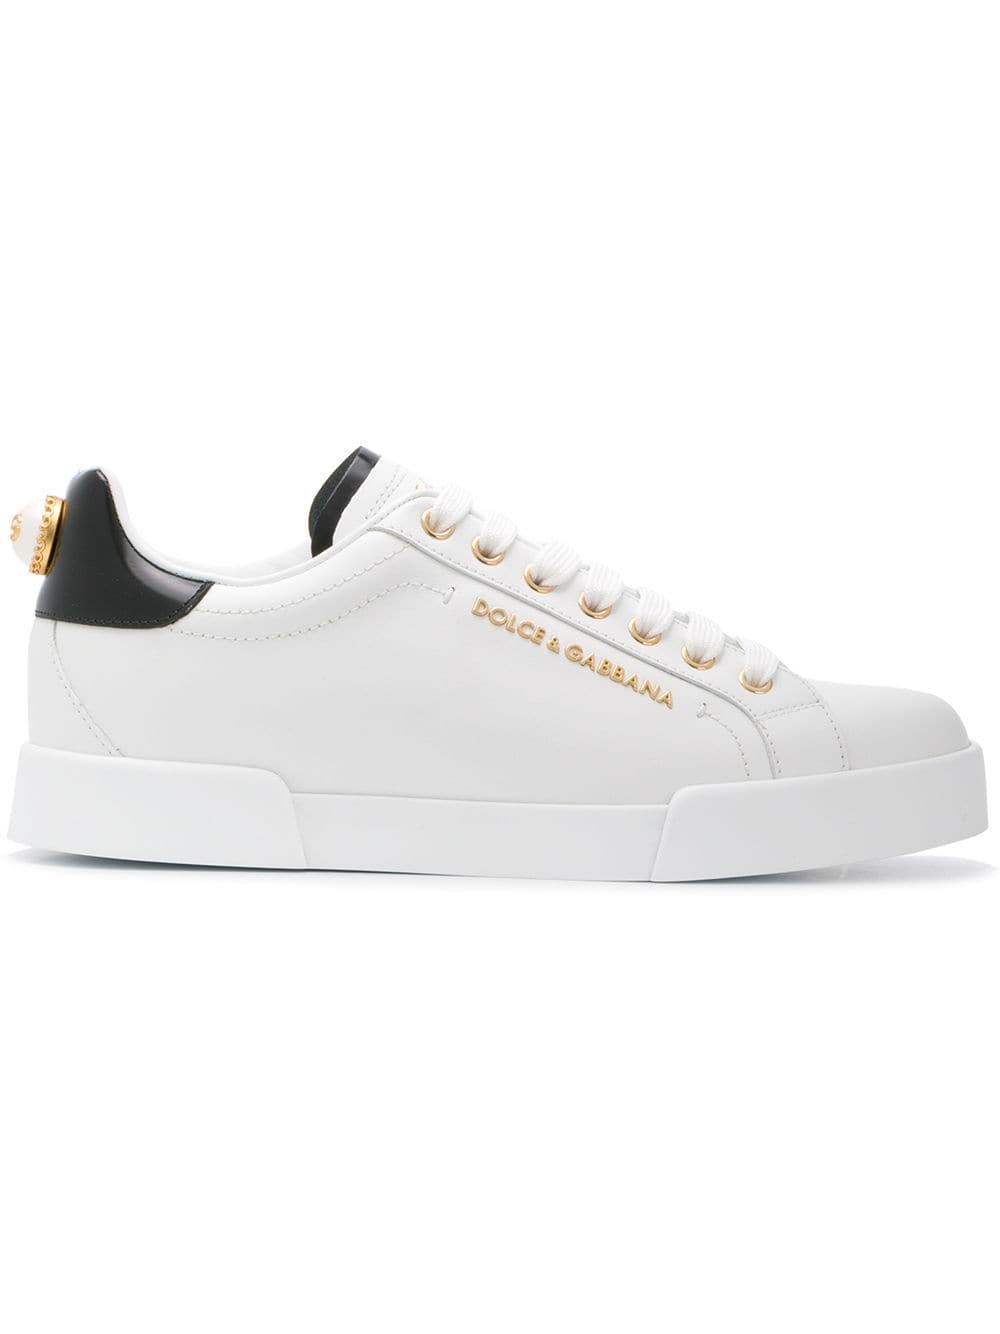 dolce & gabbana SNEAKERS available on montiboutique.com - 28893